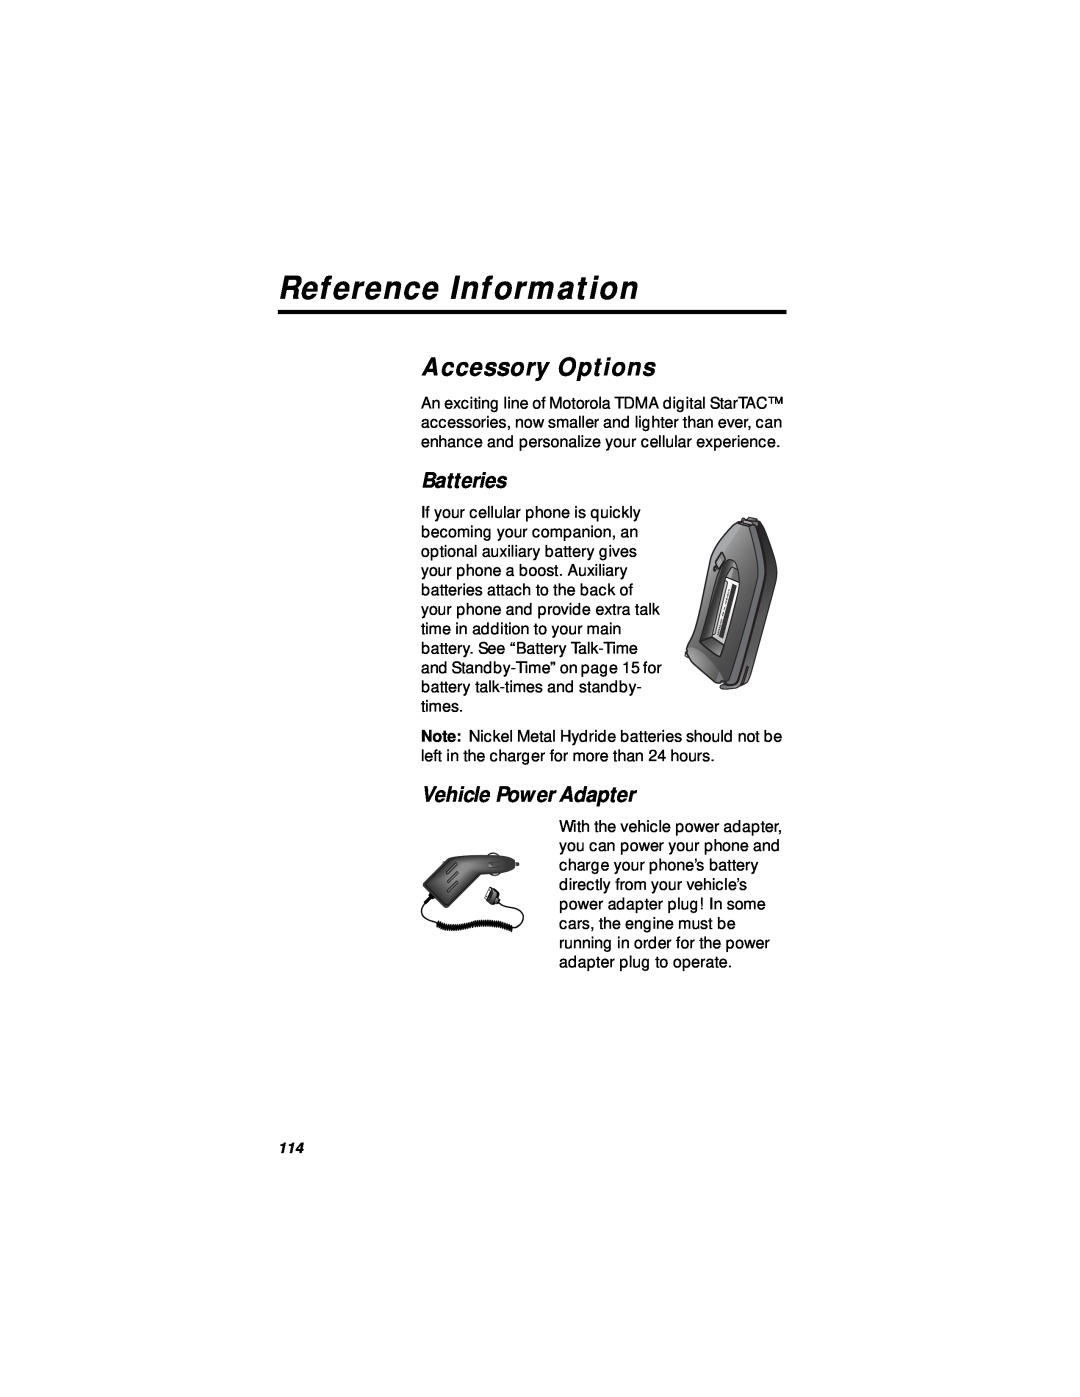 Motorola StarTAC specifications Reference Information, Accessory Options, Vehicle Power Adapter, Batteries 